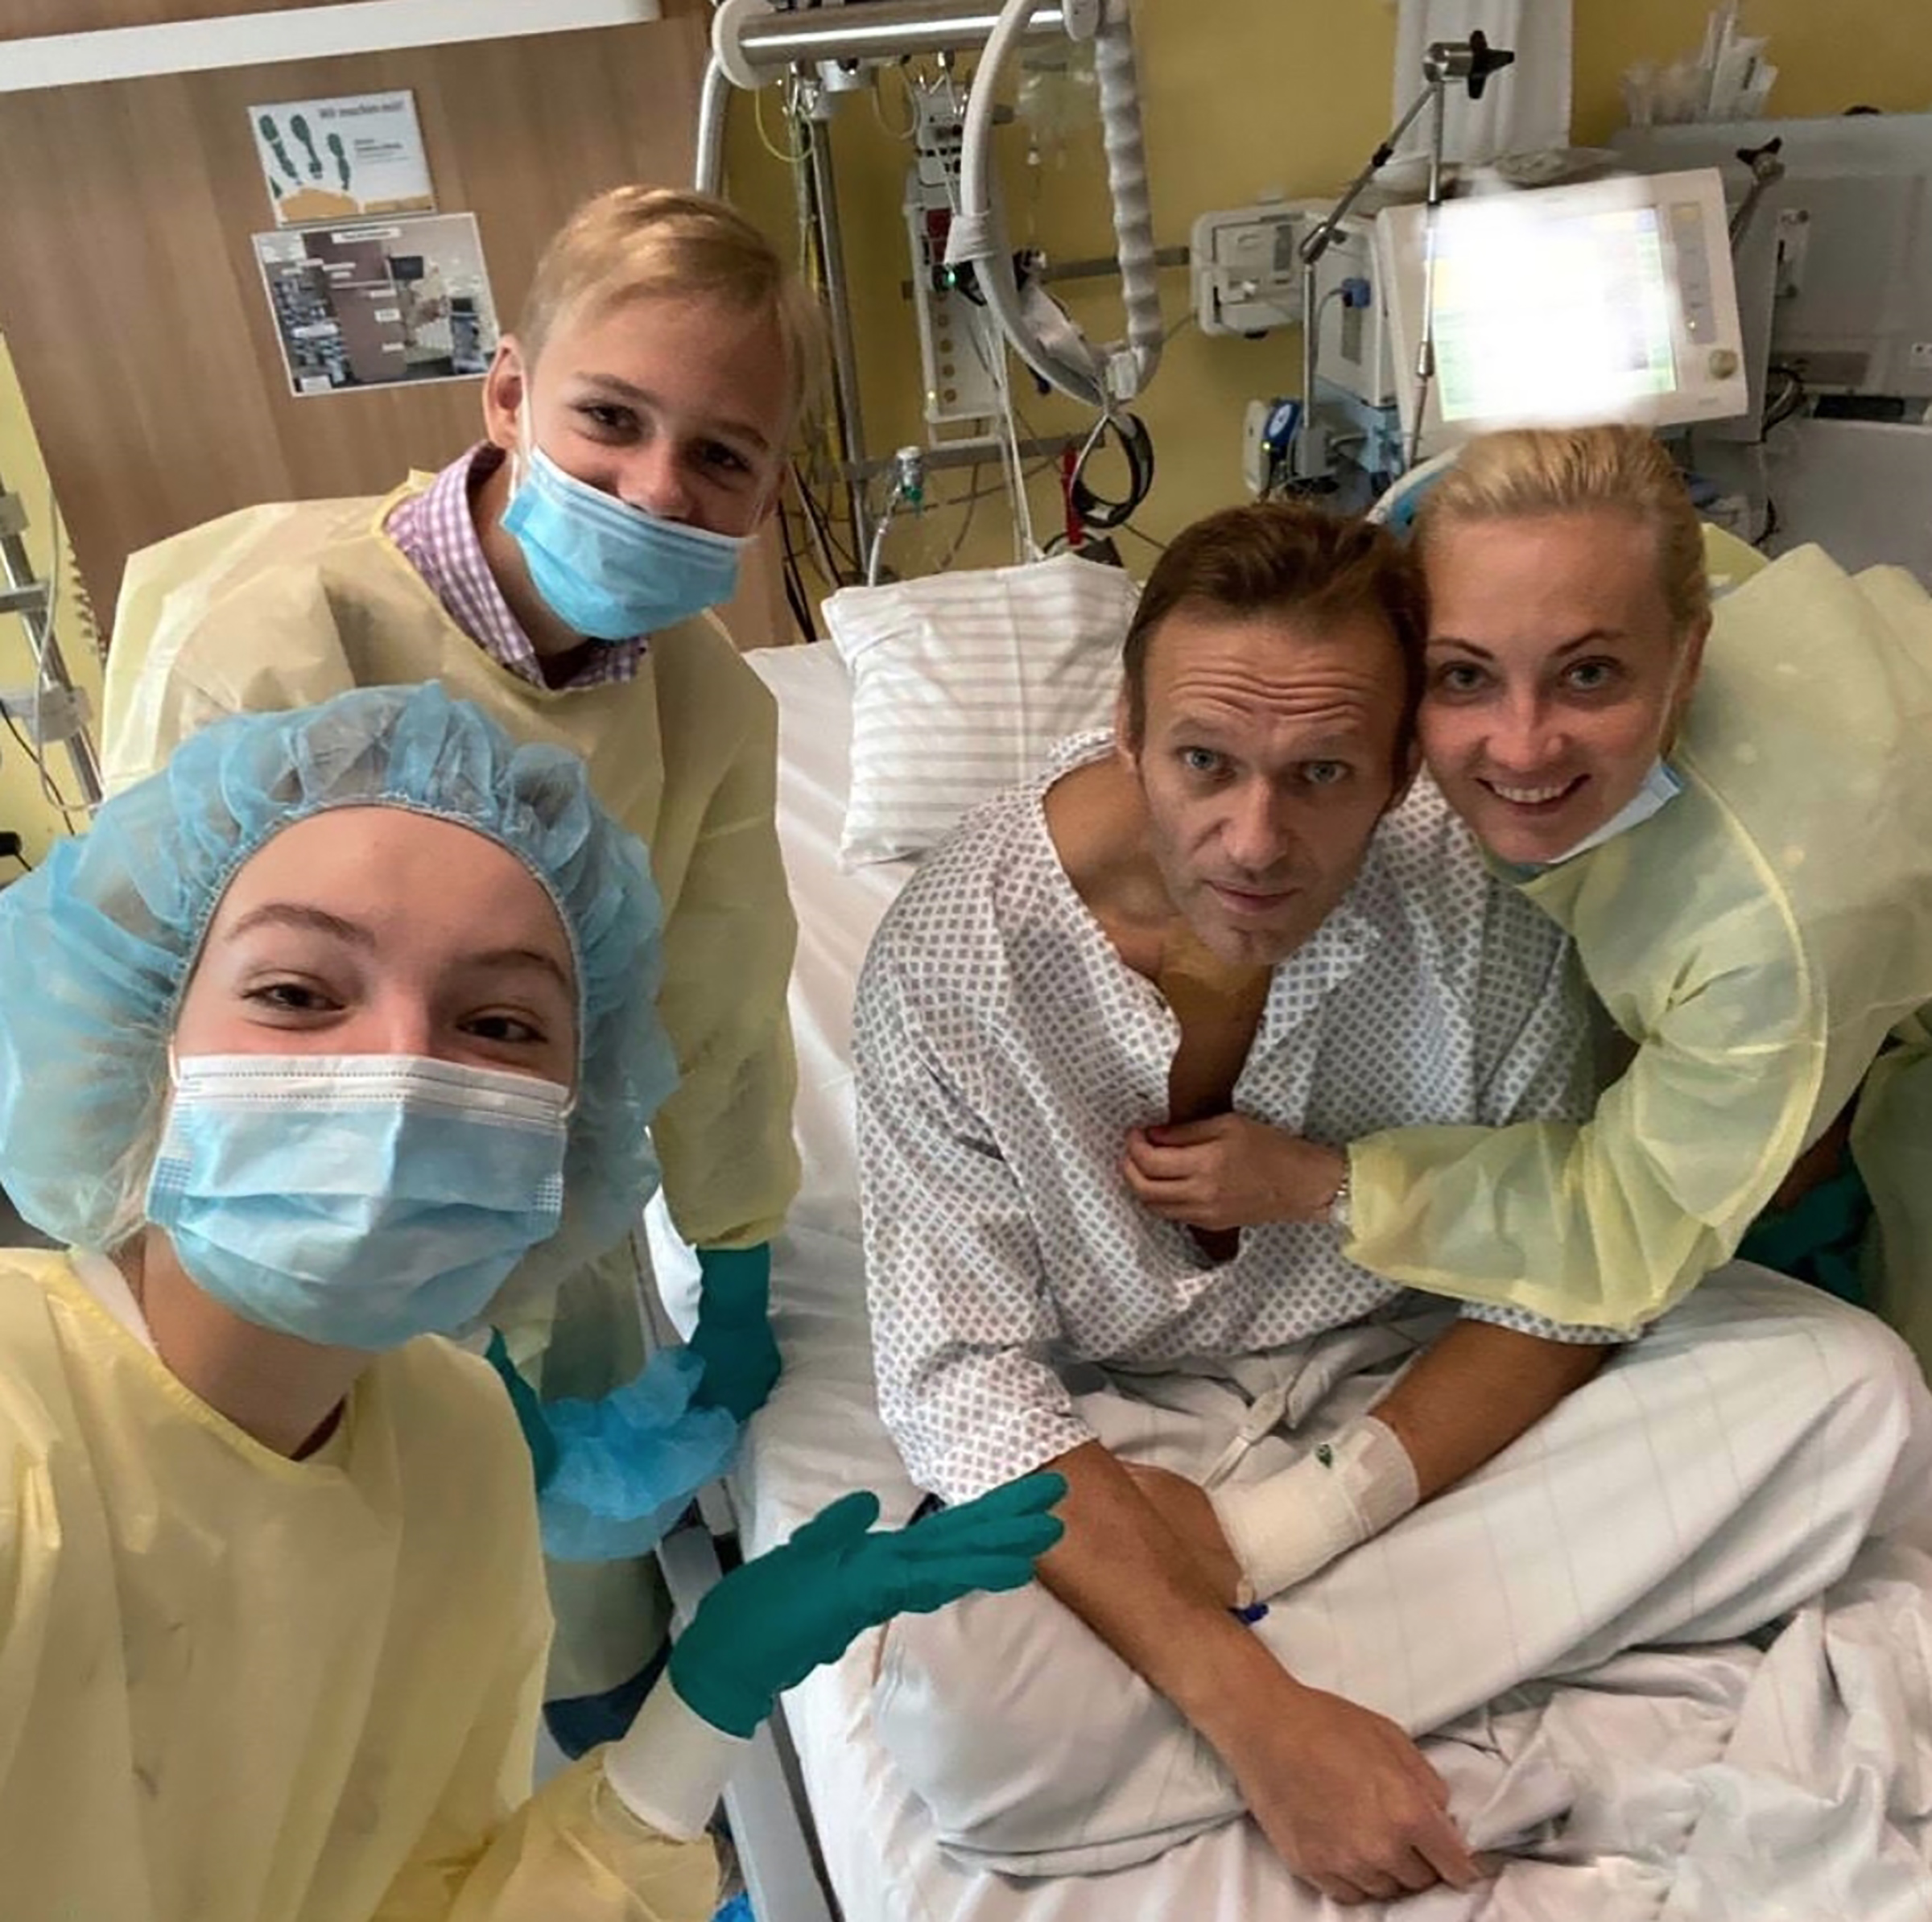 An image shared on Navalny's Instagram account shows him on a hospital bed surrounded by his wife and two children as his treatment continues in Berlin on Sept. 15, 2020. (@navalny/Handout/Anadolu Agency/Getty Images)